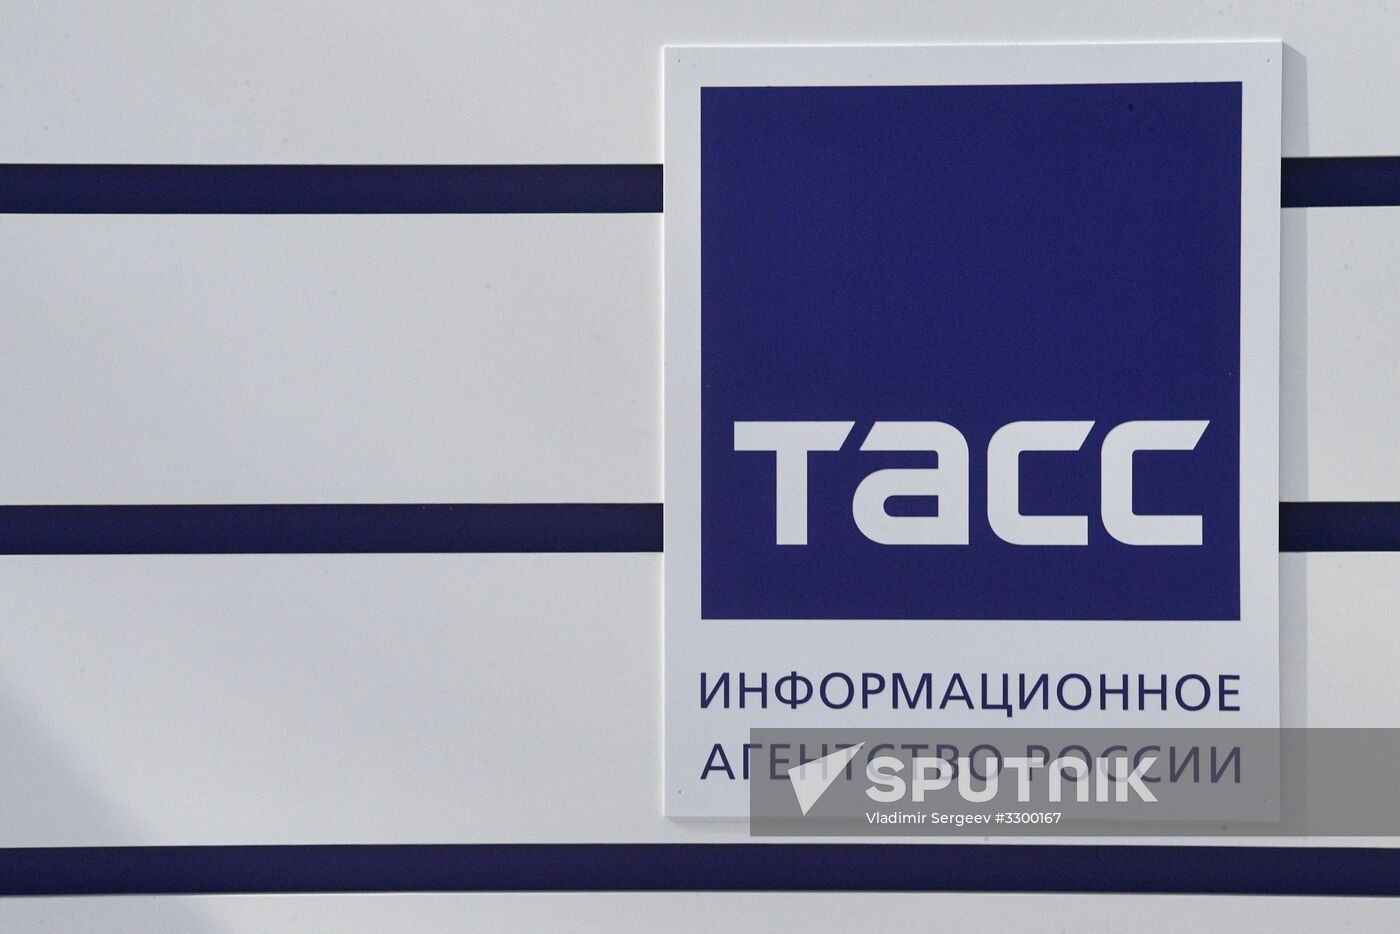 Russia TASS Agency New Editor in Chief